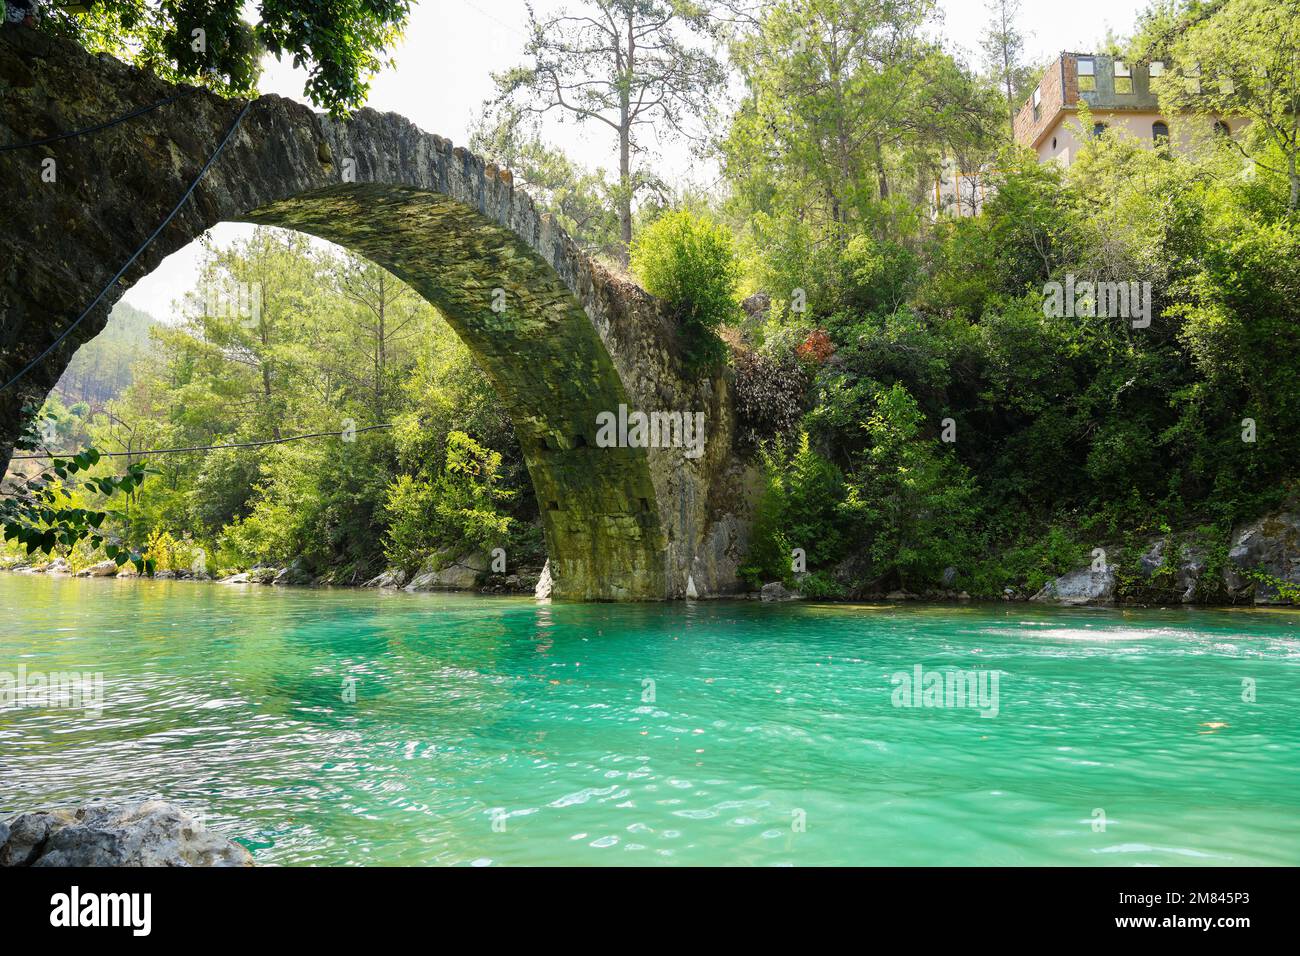 Ancient roman bridge on Dim river in Turkey. Clear turquoise water and green nature. Stock Photo